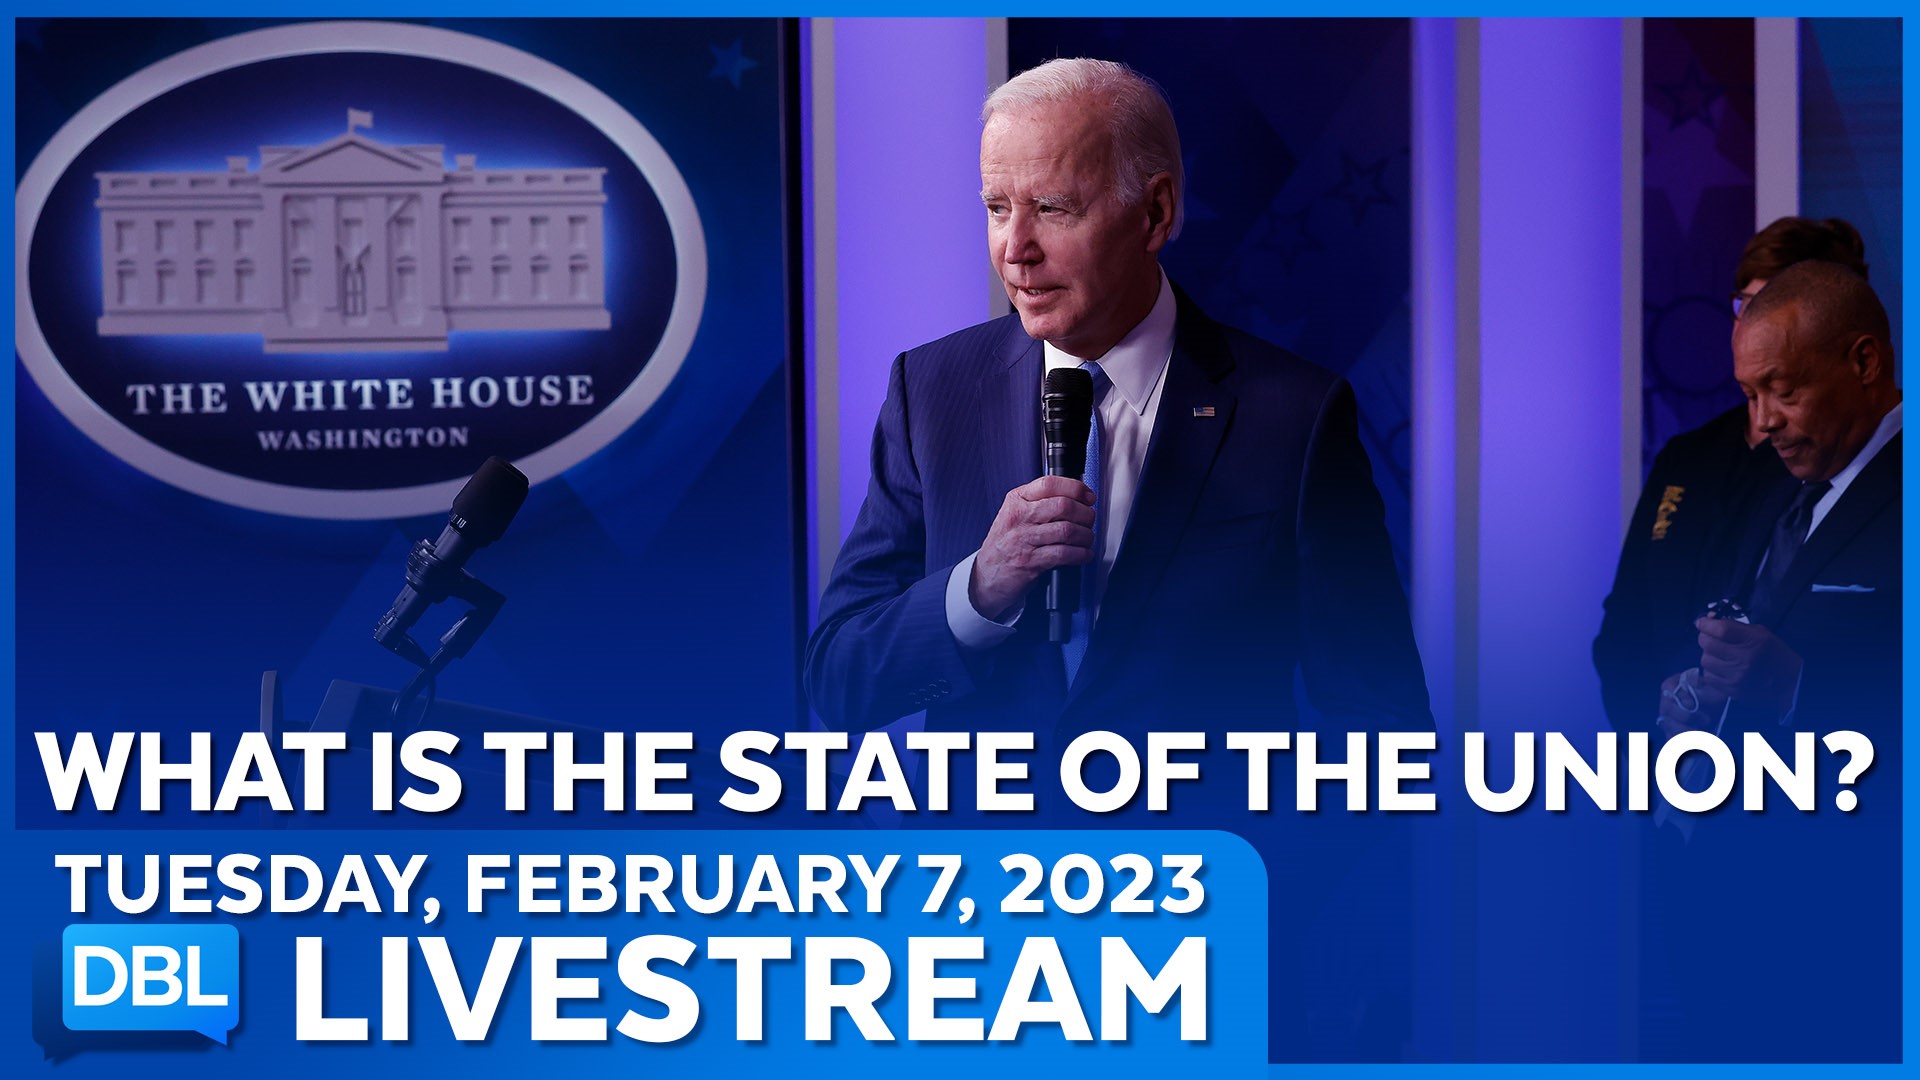 President Biden prepares for his first State of the Union before a divided Congress; Dr. Payal Kohli discusses sleep medication and alcohol consumption studies.